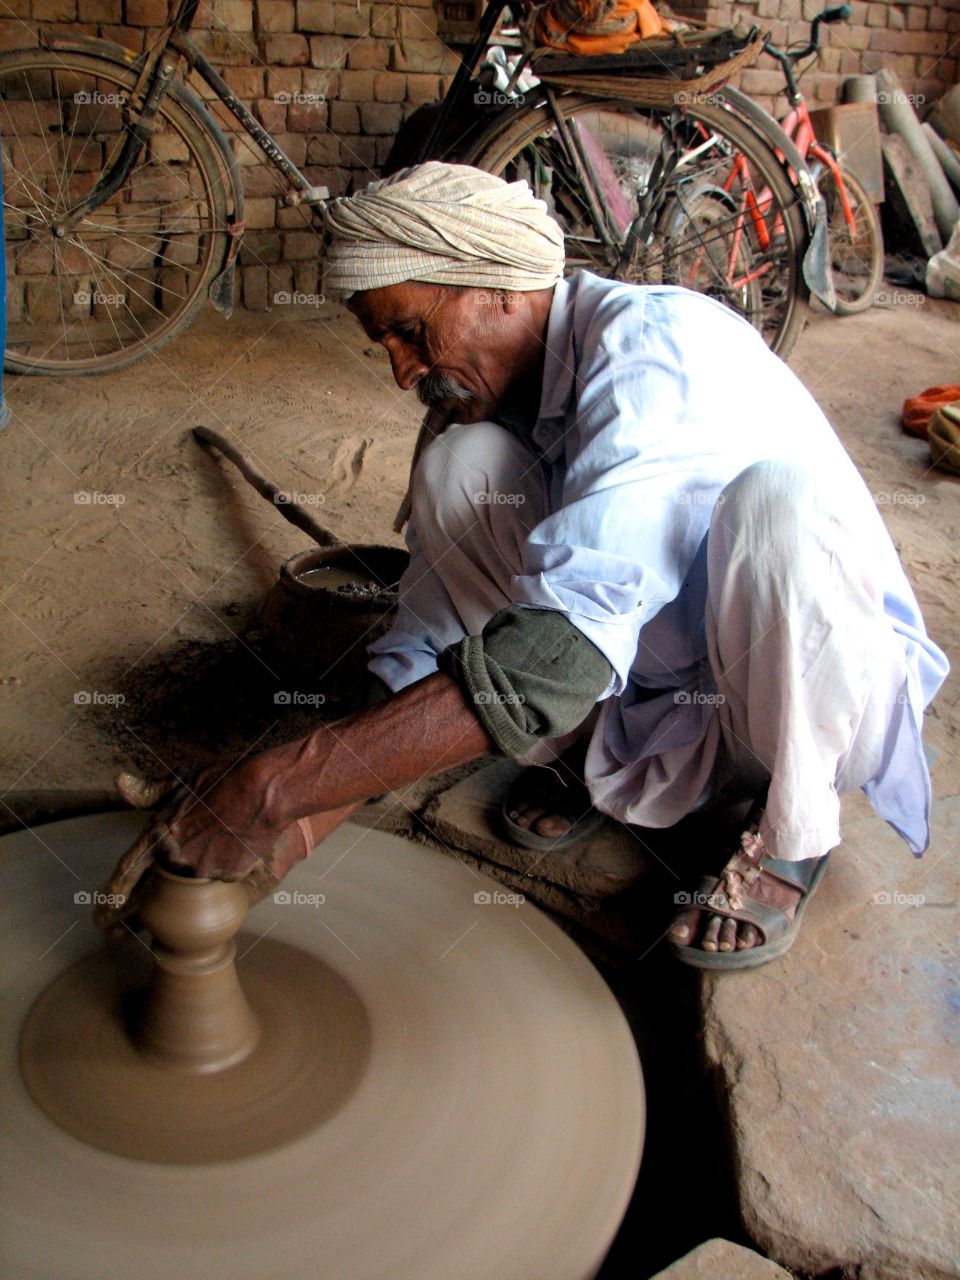 Man making a ceramic pot. Man using a wheel to create pottery in India